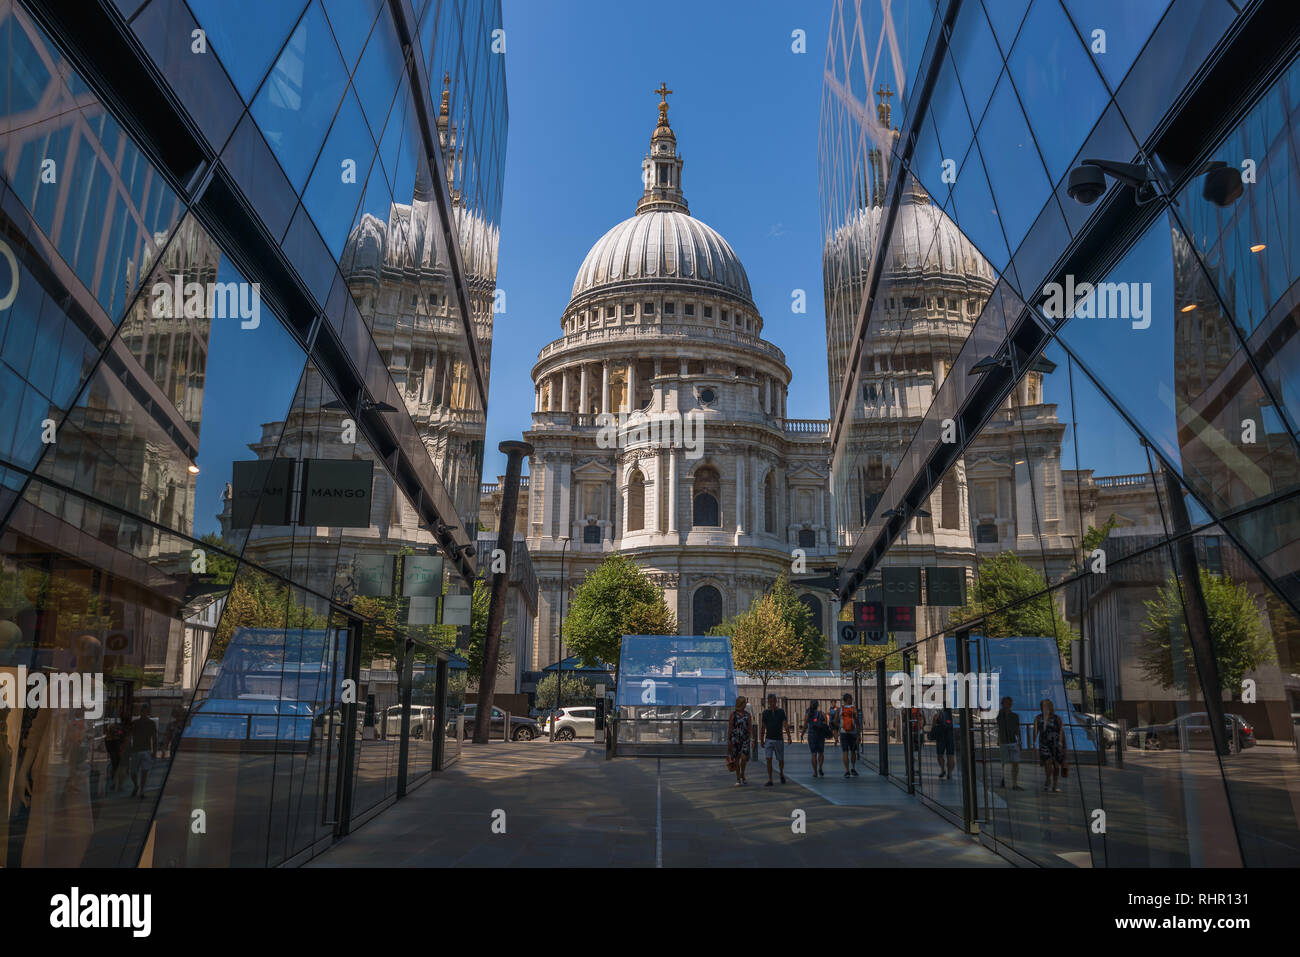 The dome of St. Paul's Cathedral and its reflection on glass panels of One New Change shopping centre. London, United Kingdom. Stock Photo